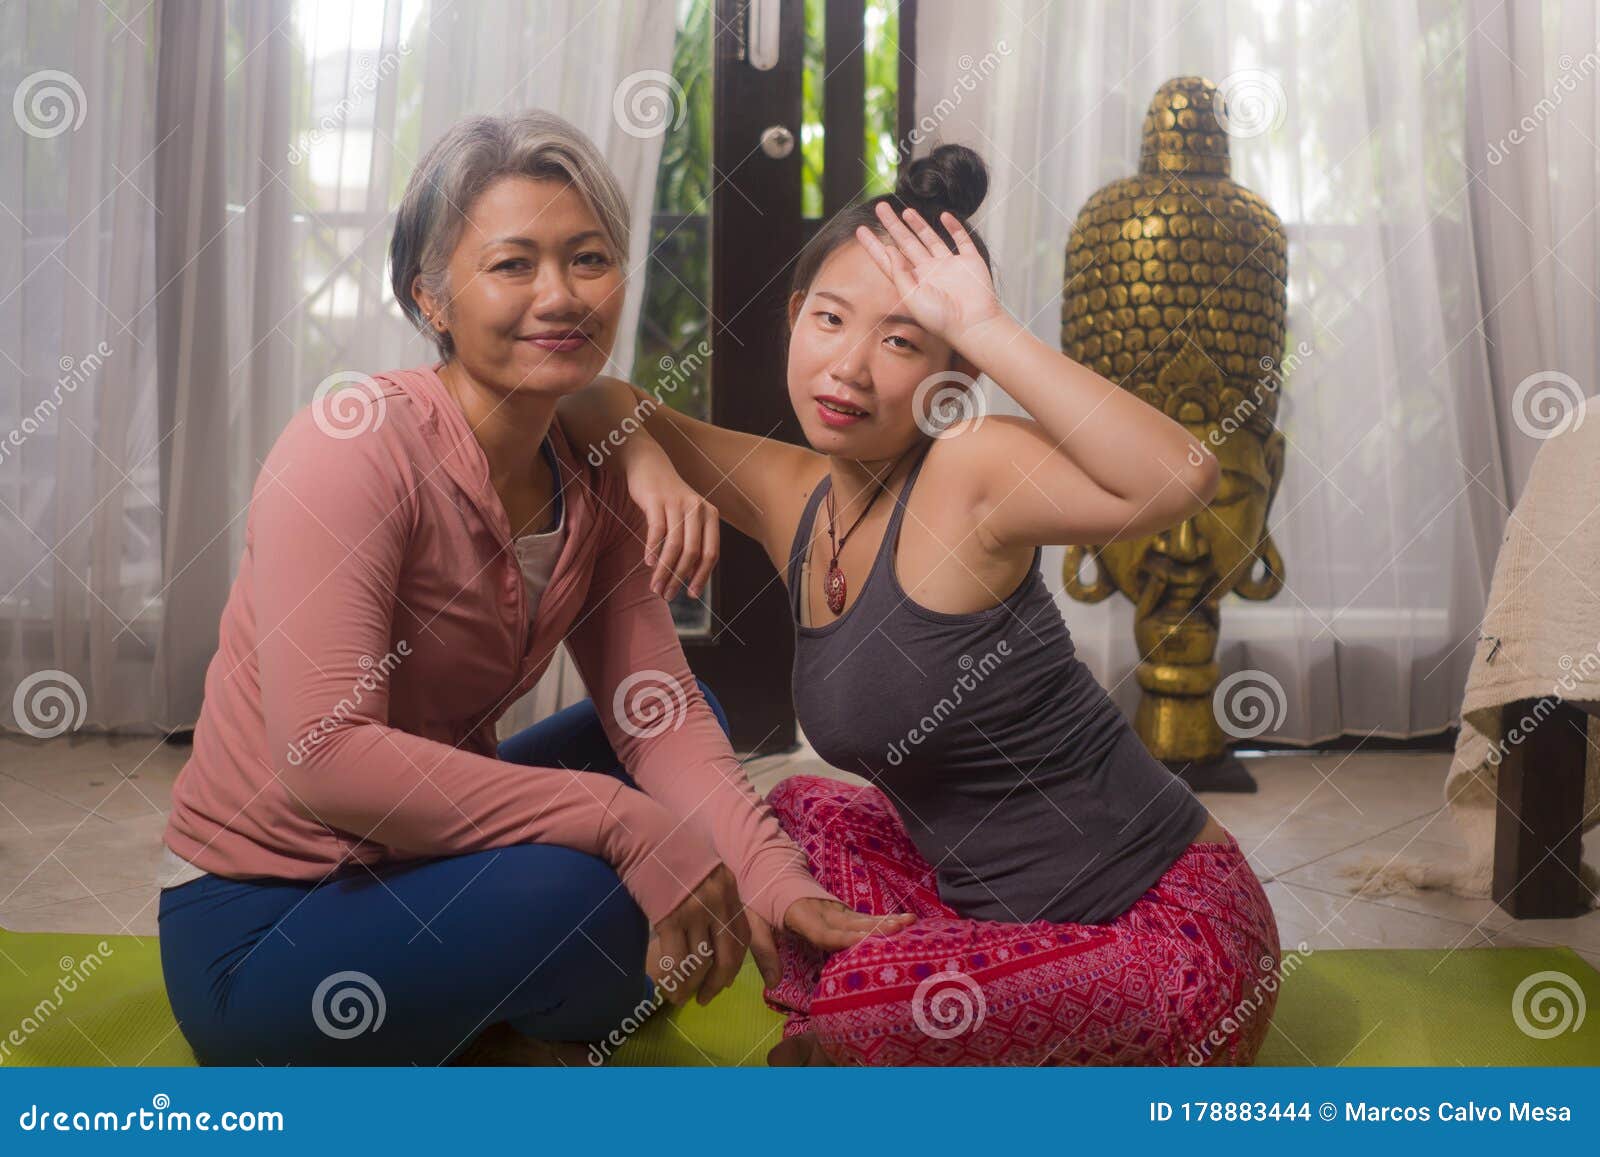 https://thumbs.dreamstime.com/z/happy-girlfriends-enjoying-yoga-fitness-workout-home-two-beautiful-asian-women-posing-together-exercise-session-happy-178883444.jpg